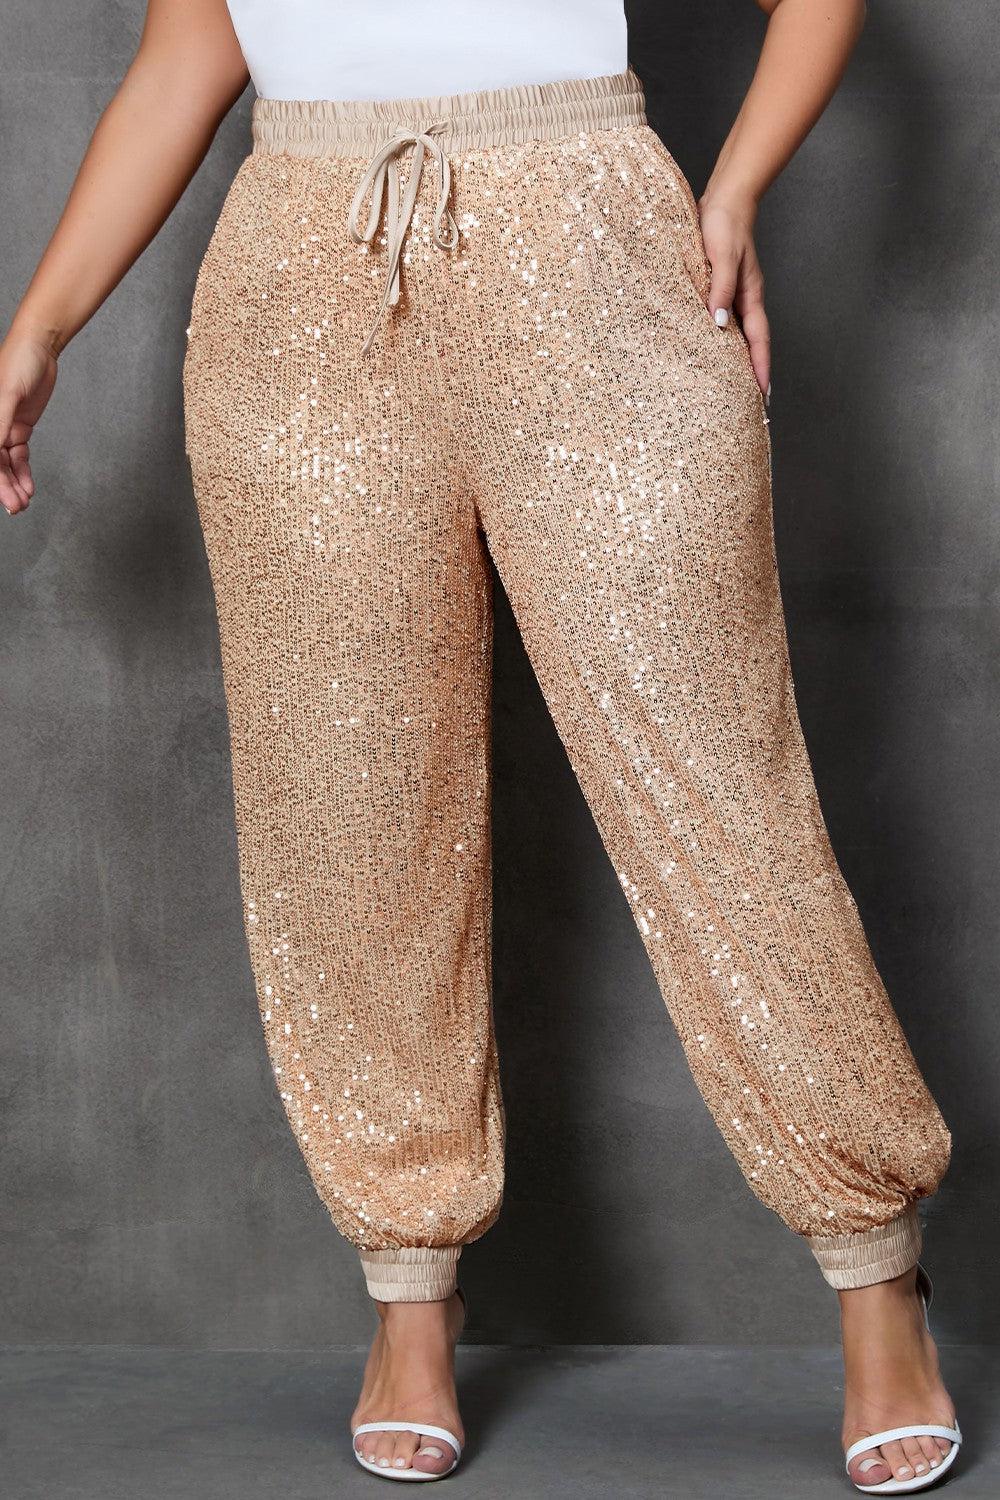 a woman in a white top and gold sequin pants